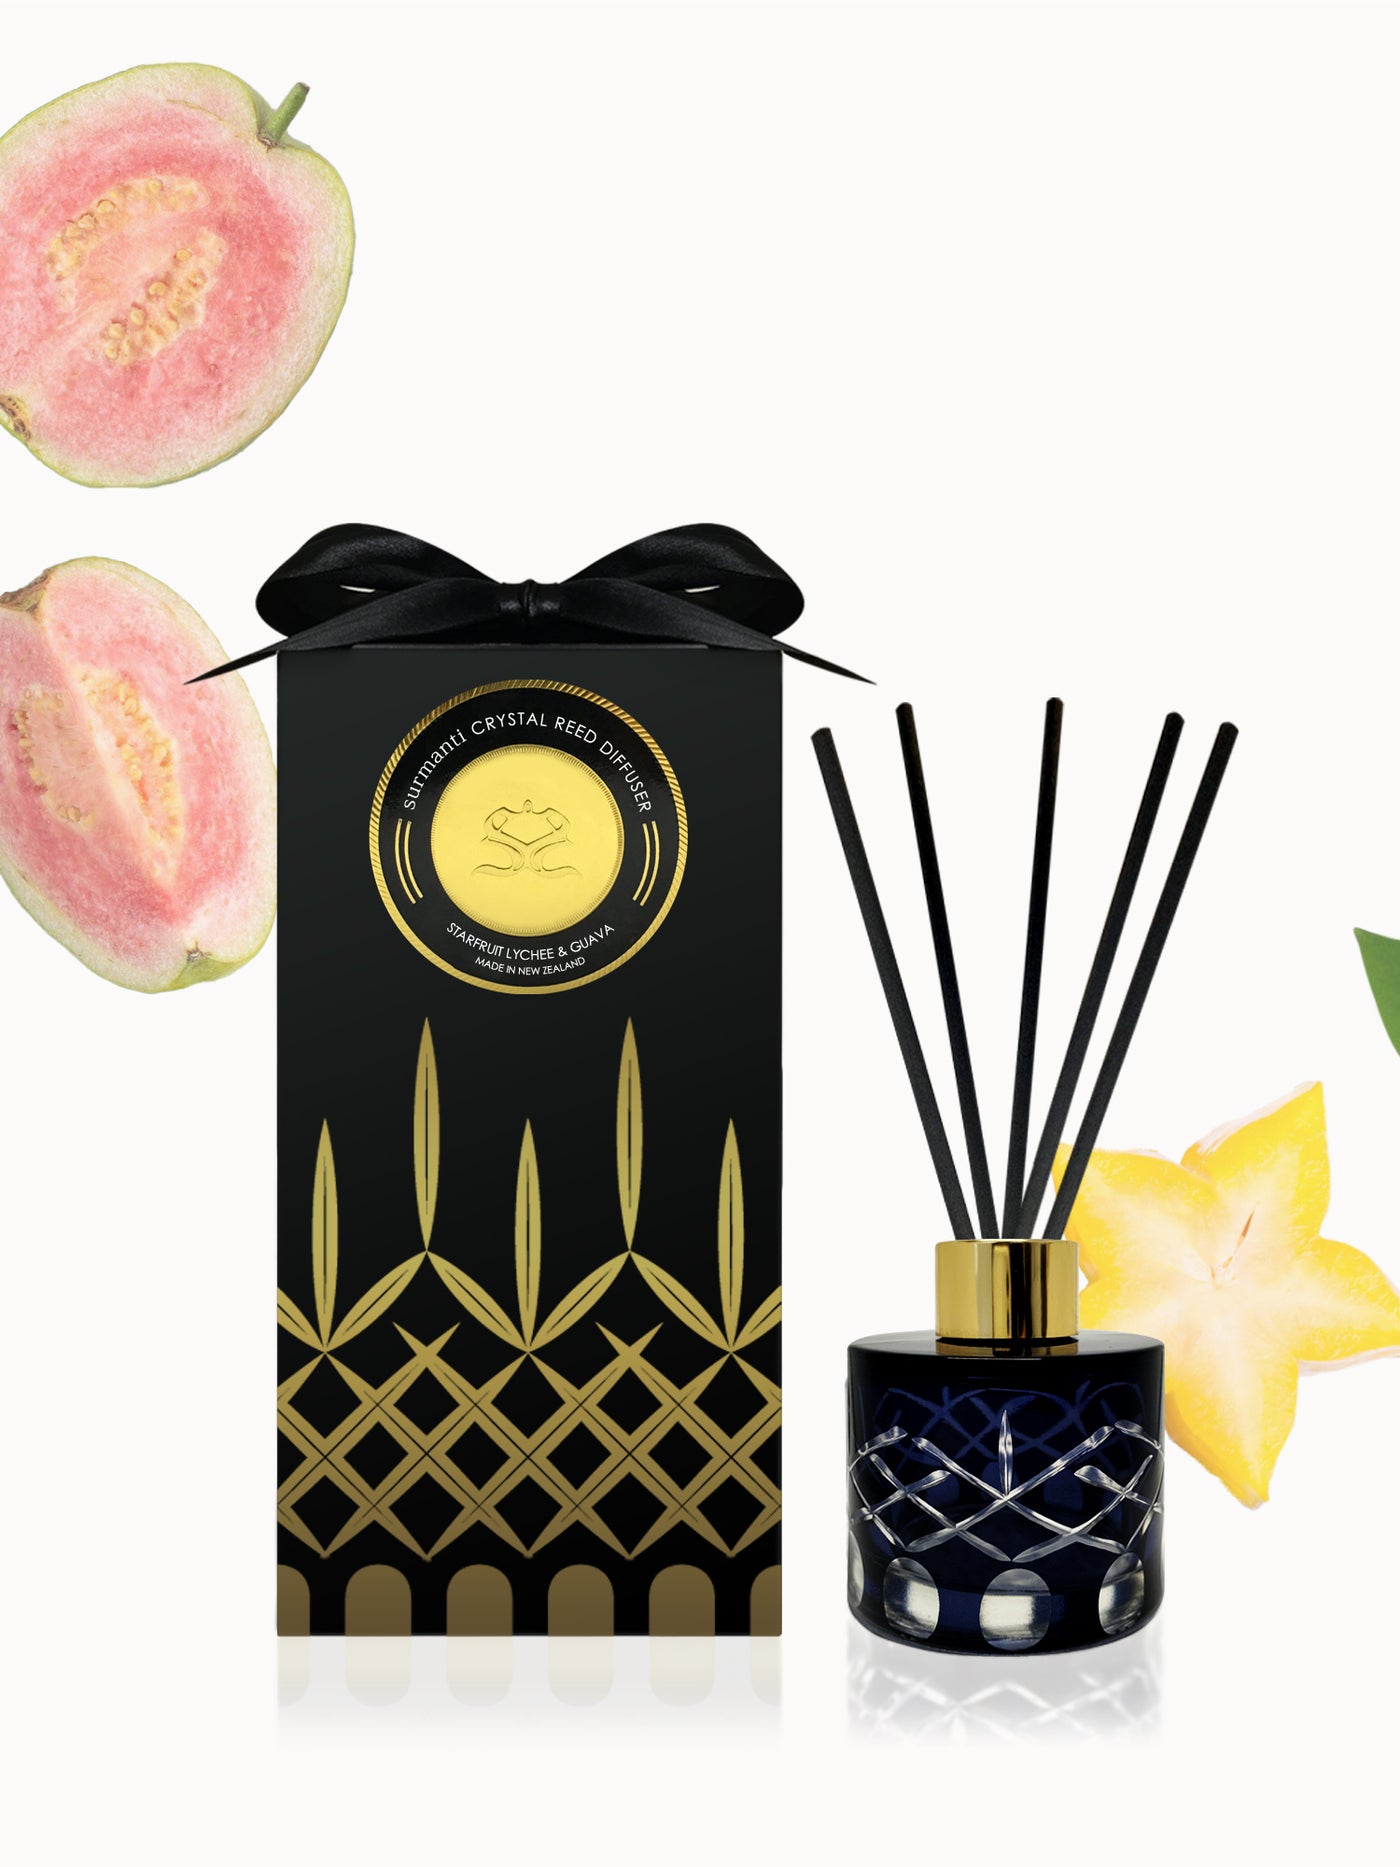 Starfruit Lychee & Guava Crystal Reed Diffuser - Small Rooms 100ml